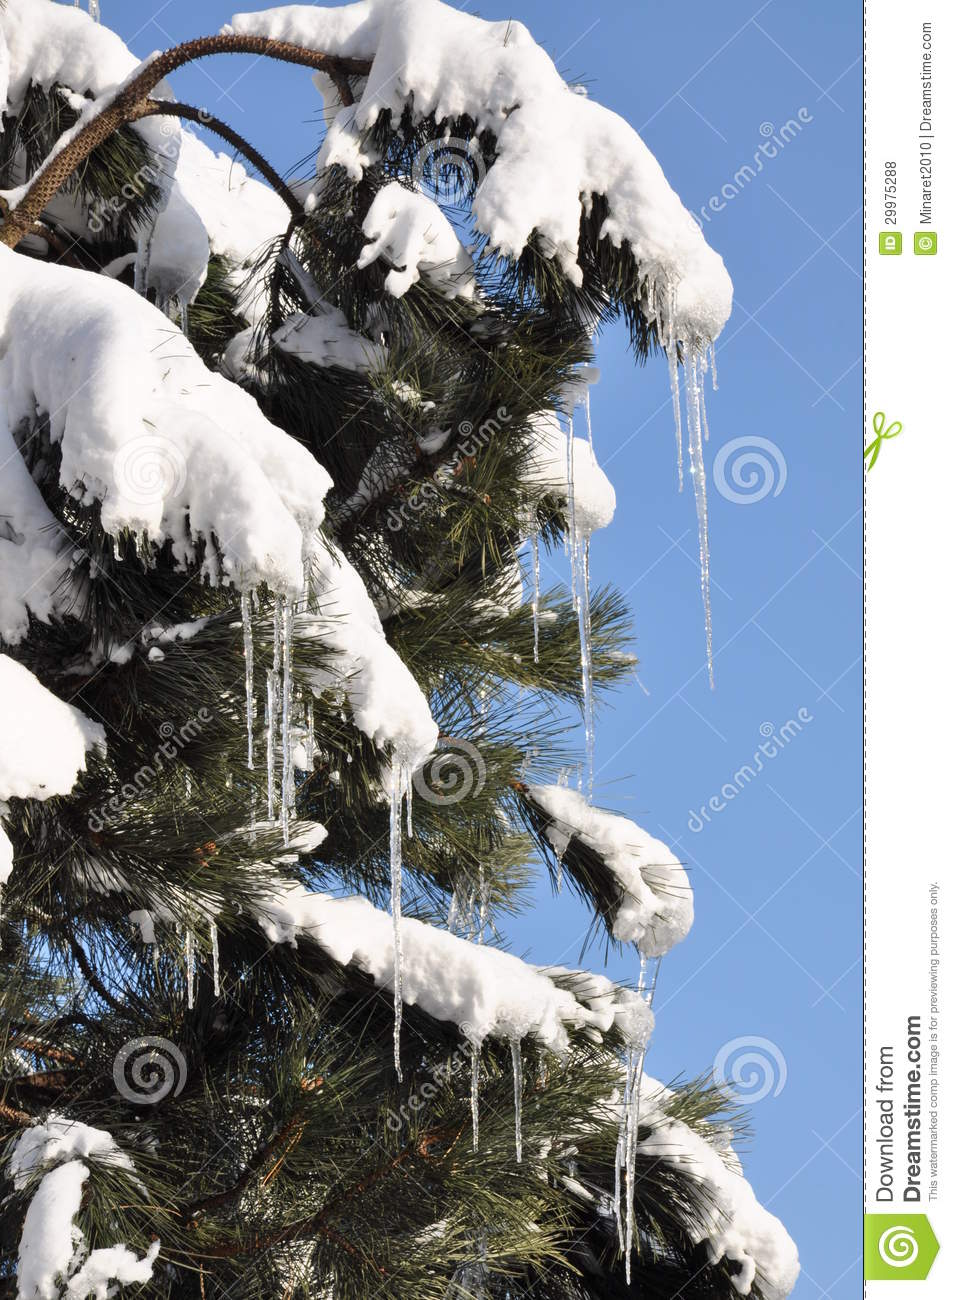 Icicles And Snow On Pine Tree The End Of Winter Royalty Free Stock